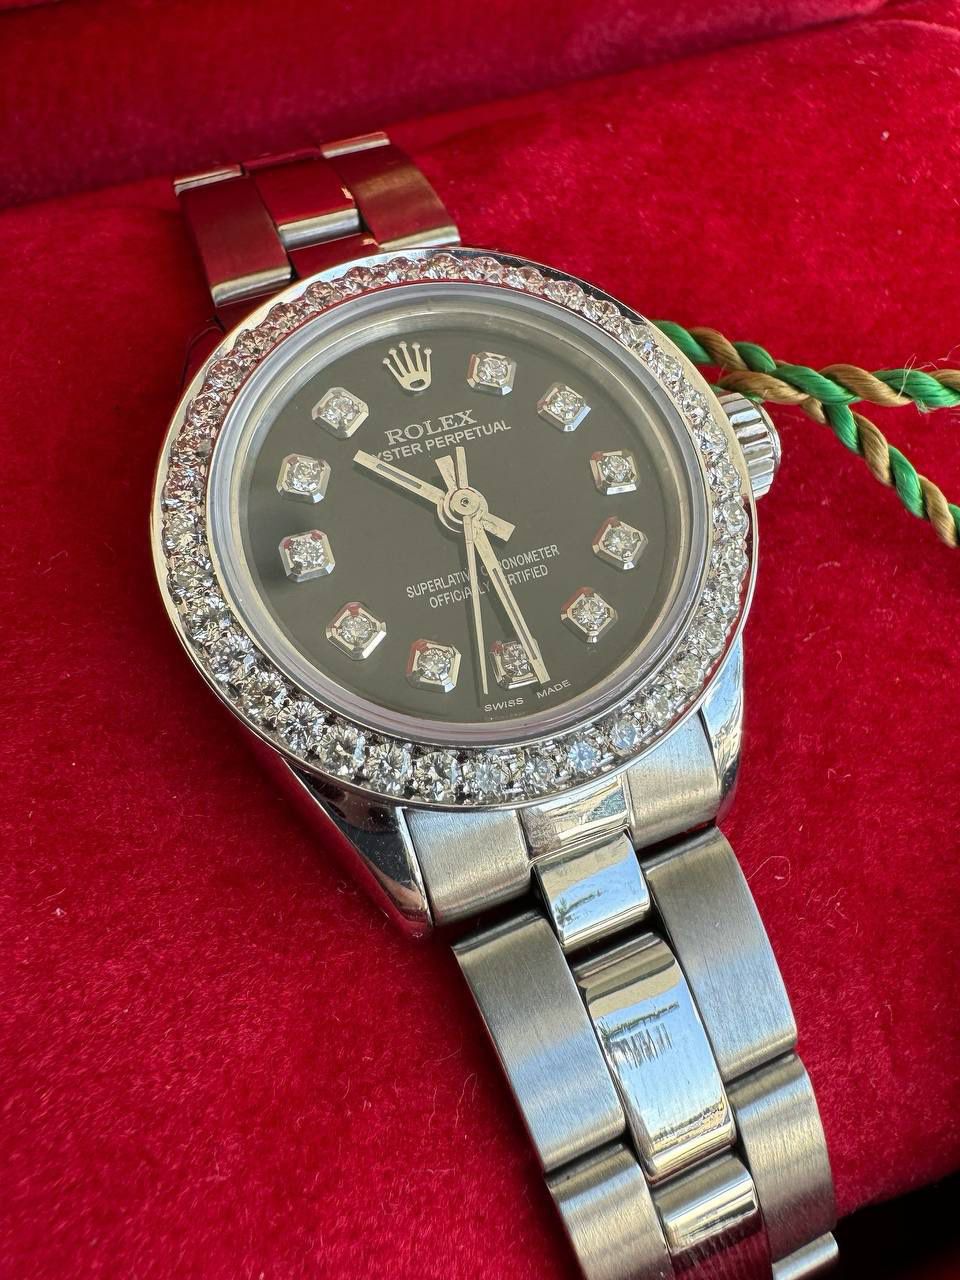 Rolex Oyster Perpetual no date 24mm black diamond dial white gold diamond bezel box and papers lady watch